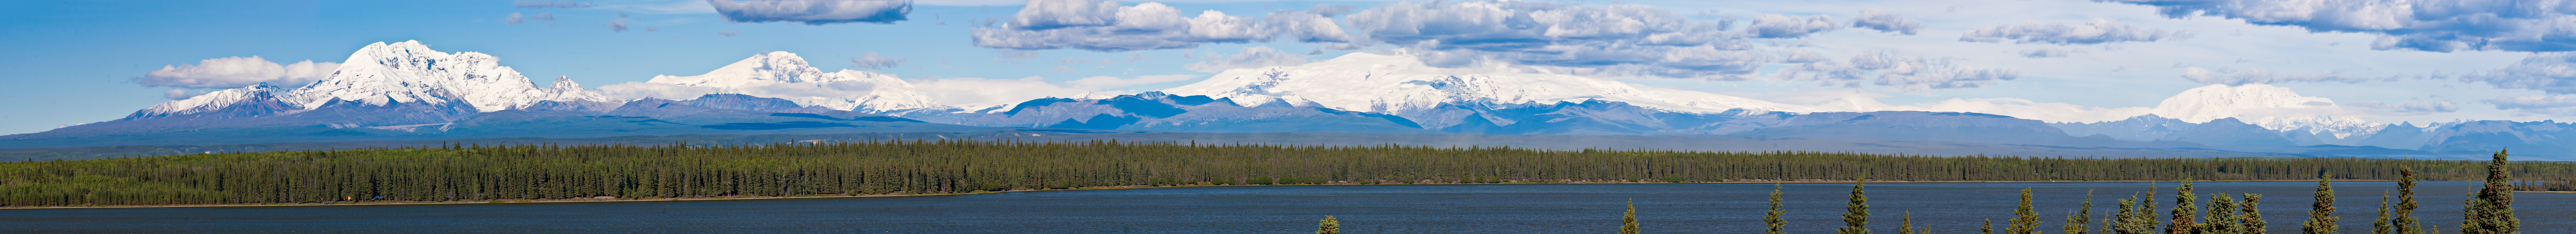 Here's a panorama of the Wrangell Mountains, viewed from a pullout overlooking Willow Lake along the Richardson Highway near Glennallen, Alaska.  A day this clear is rare, and the view is spectacular.  You have to view it full-sized to begin to appreciate what it's like scanning this range with binoculars. From Richardson Highway in Alaska.